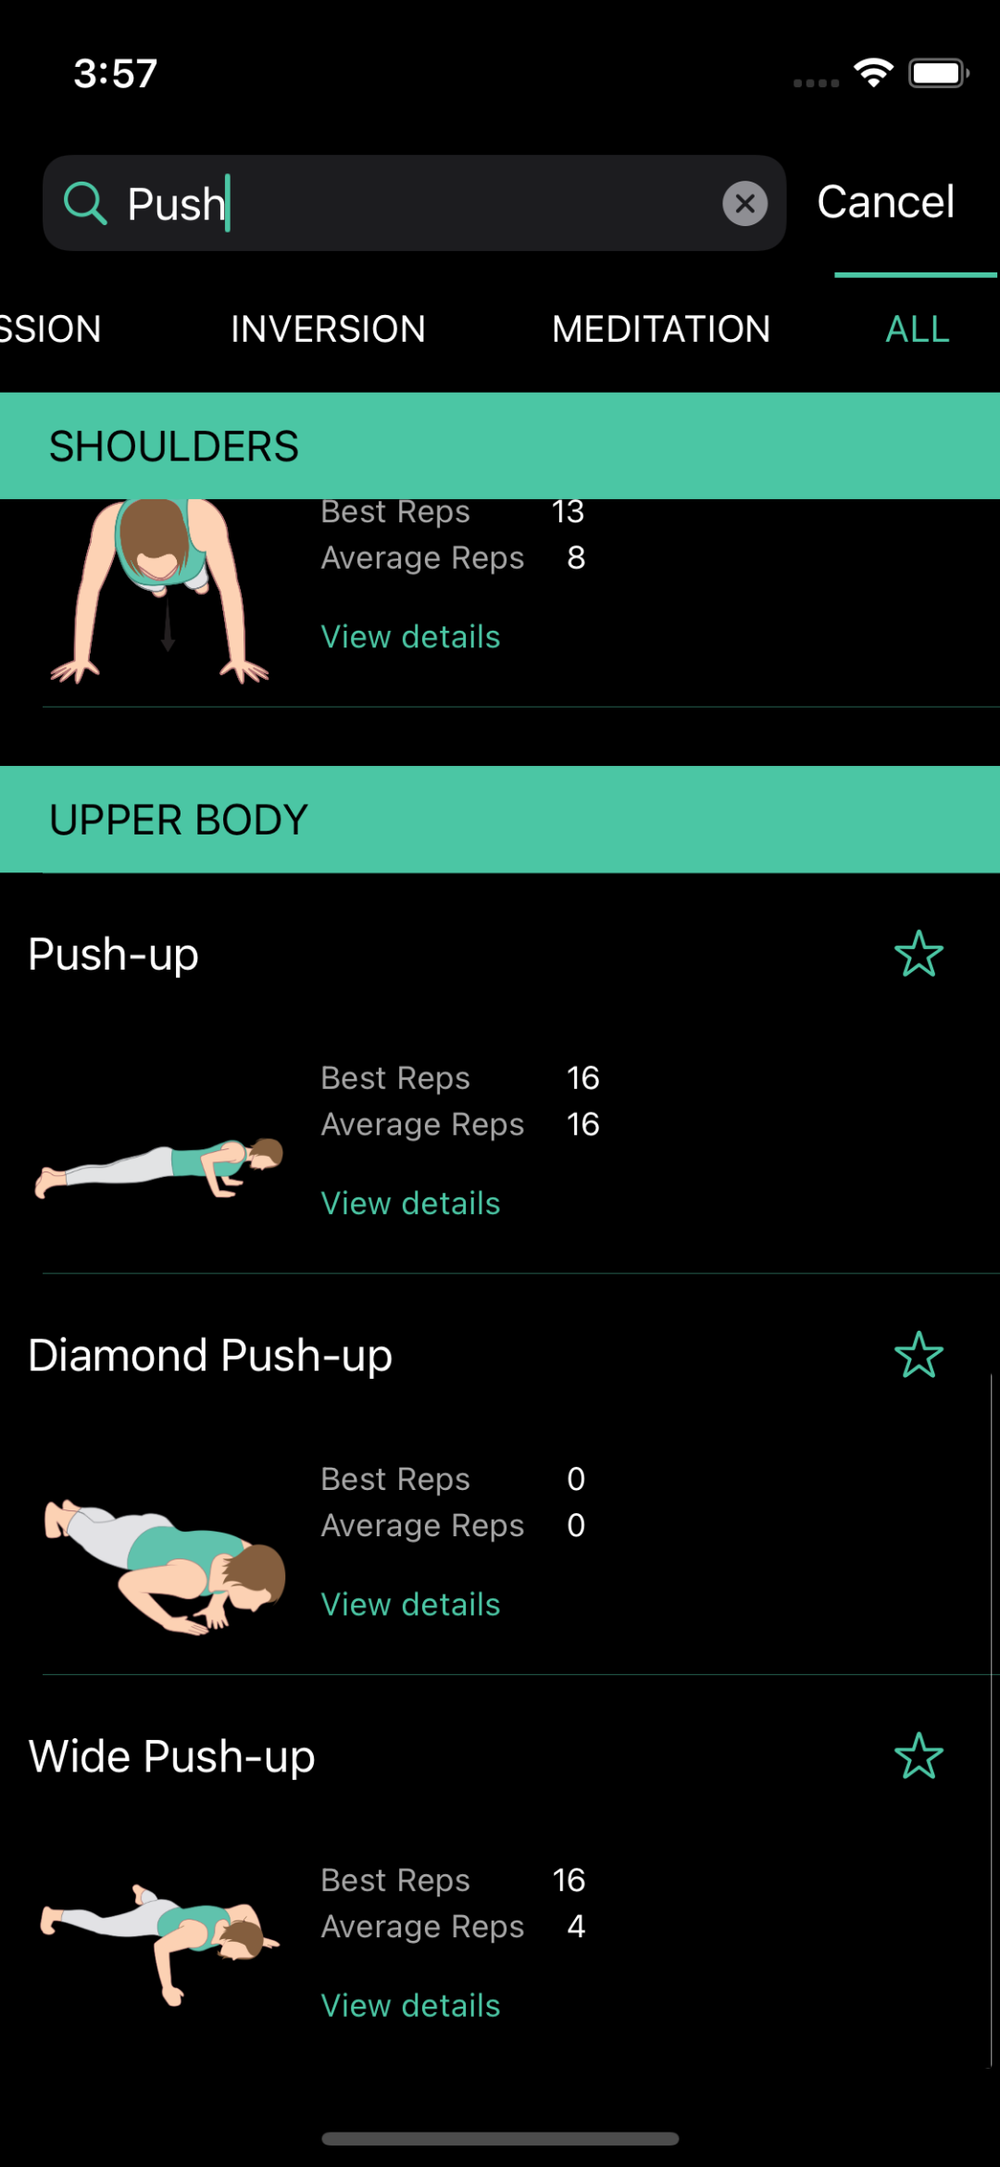 Searching and picking push-up